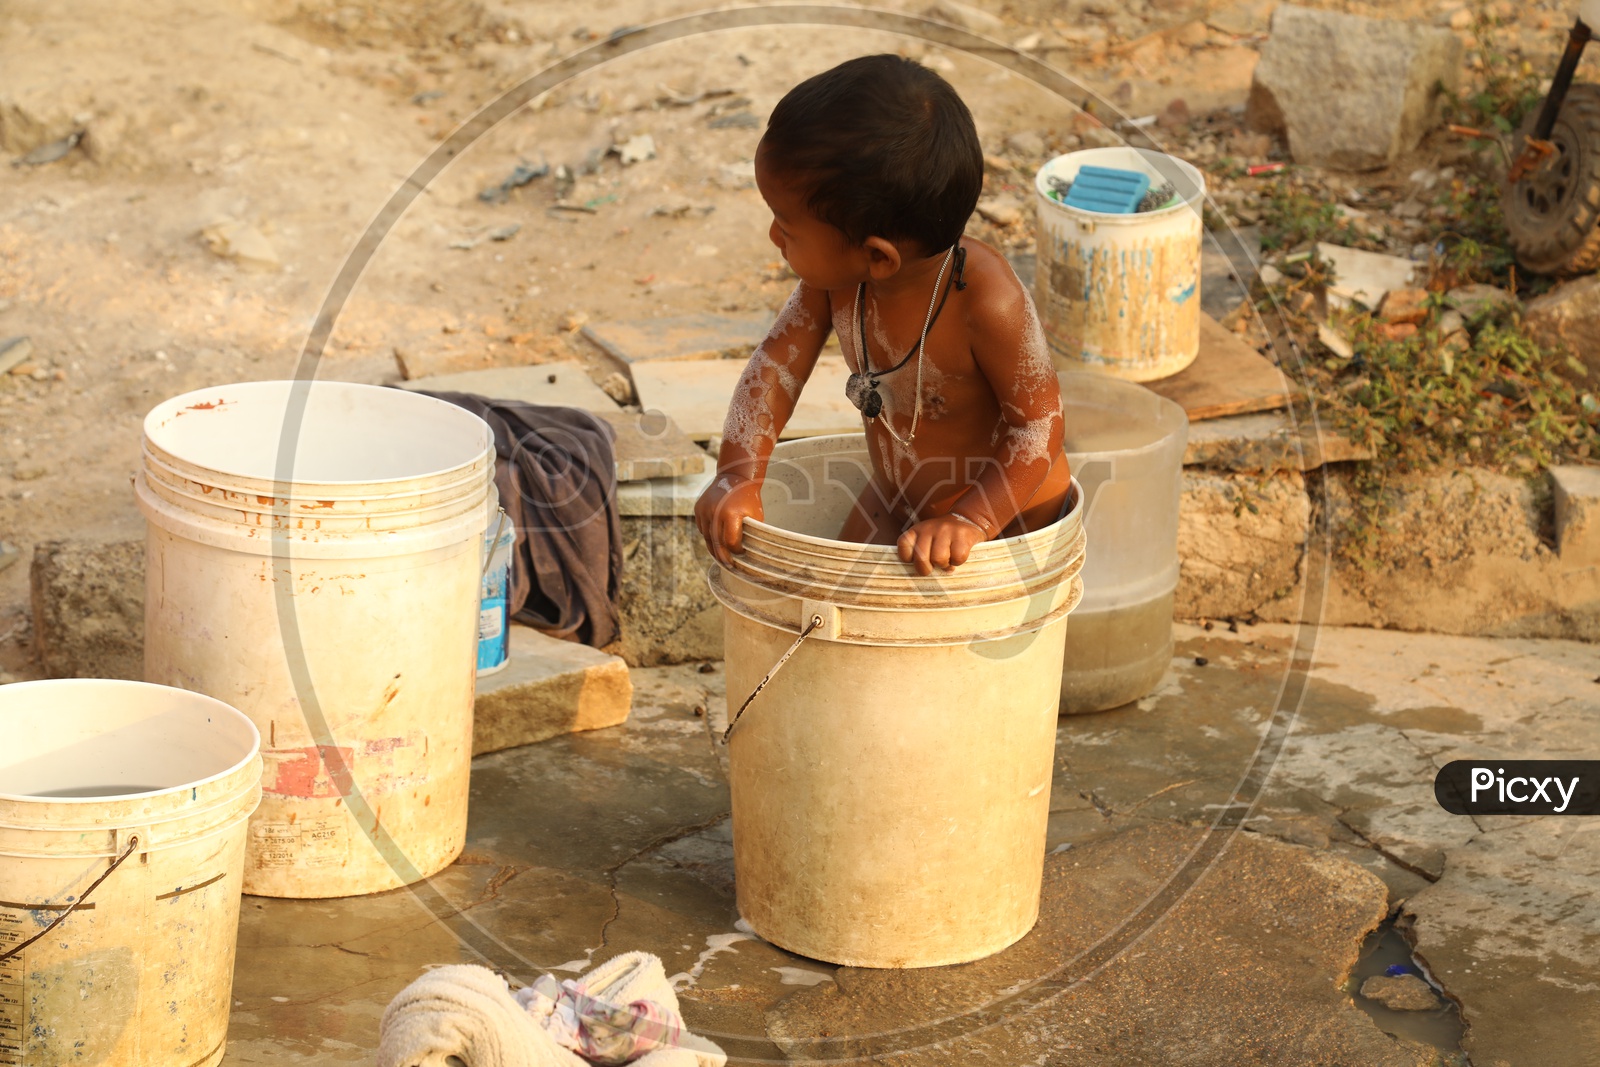 A Child playing with water in a bucket during shower